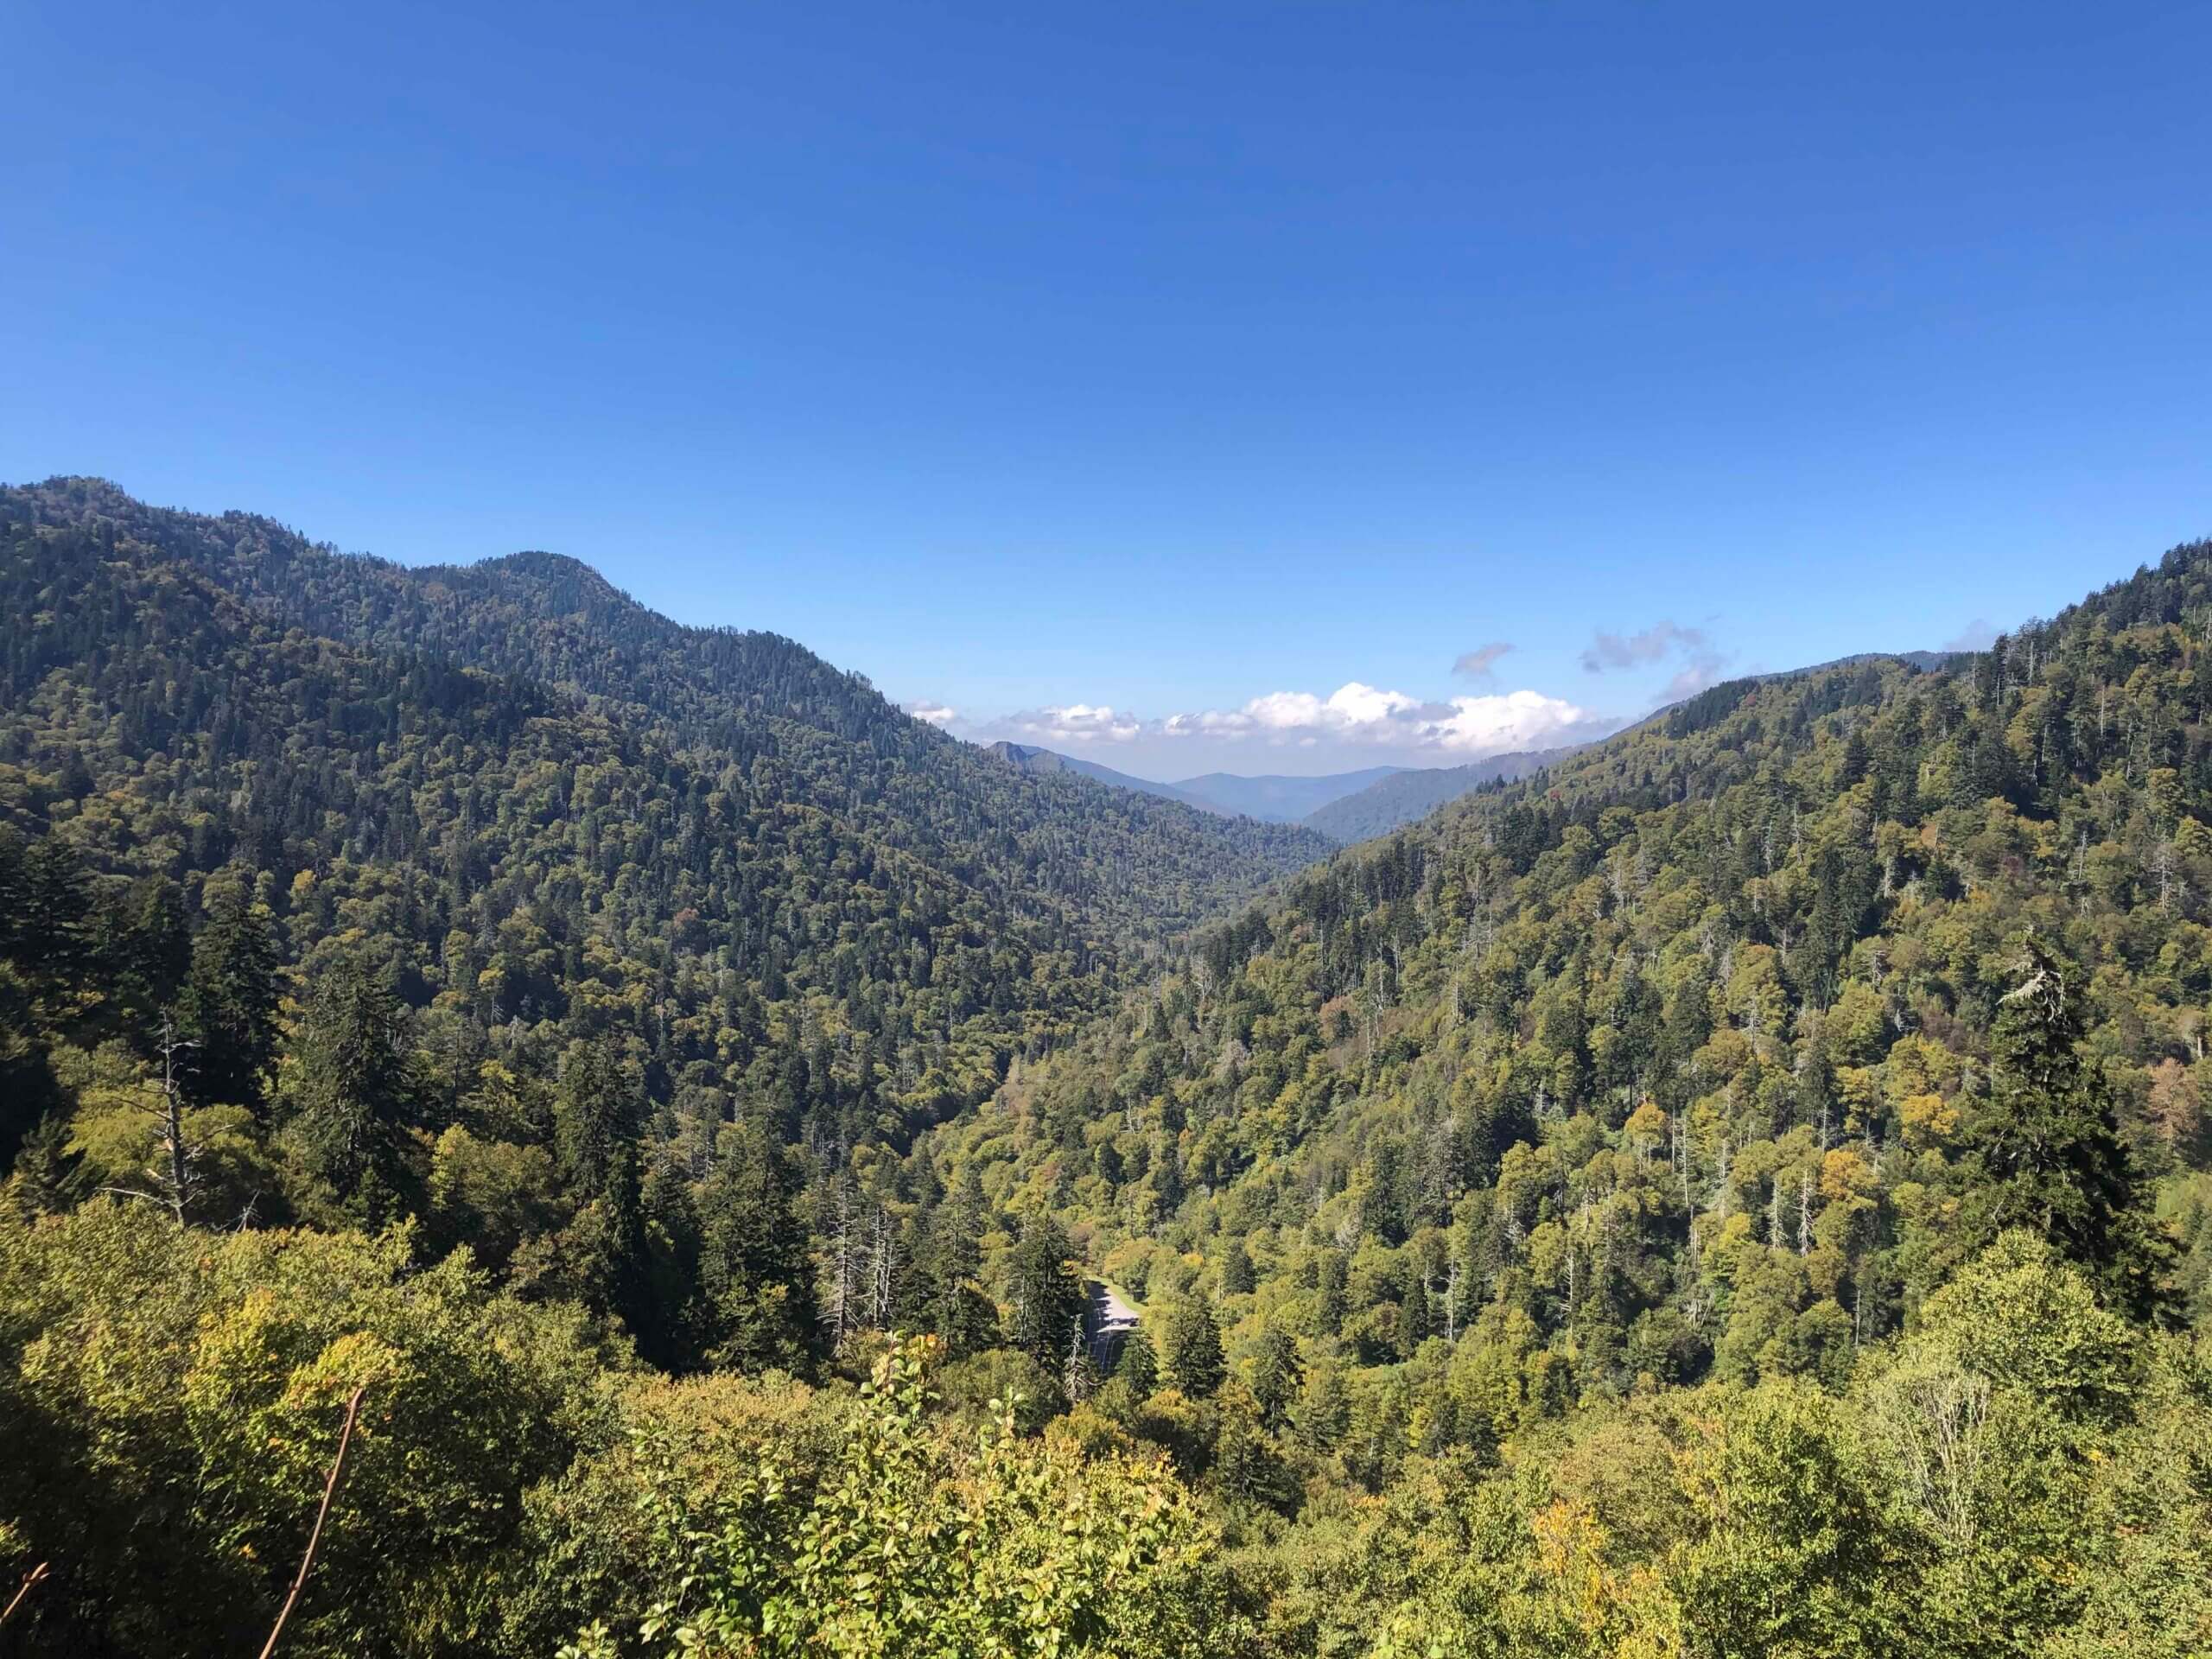 View of GSMNP from Tennessee side of park